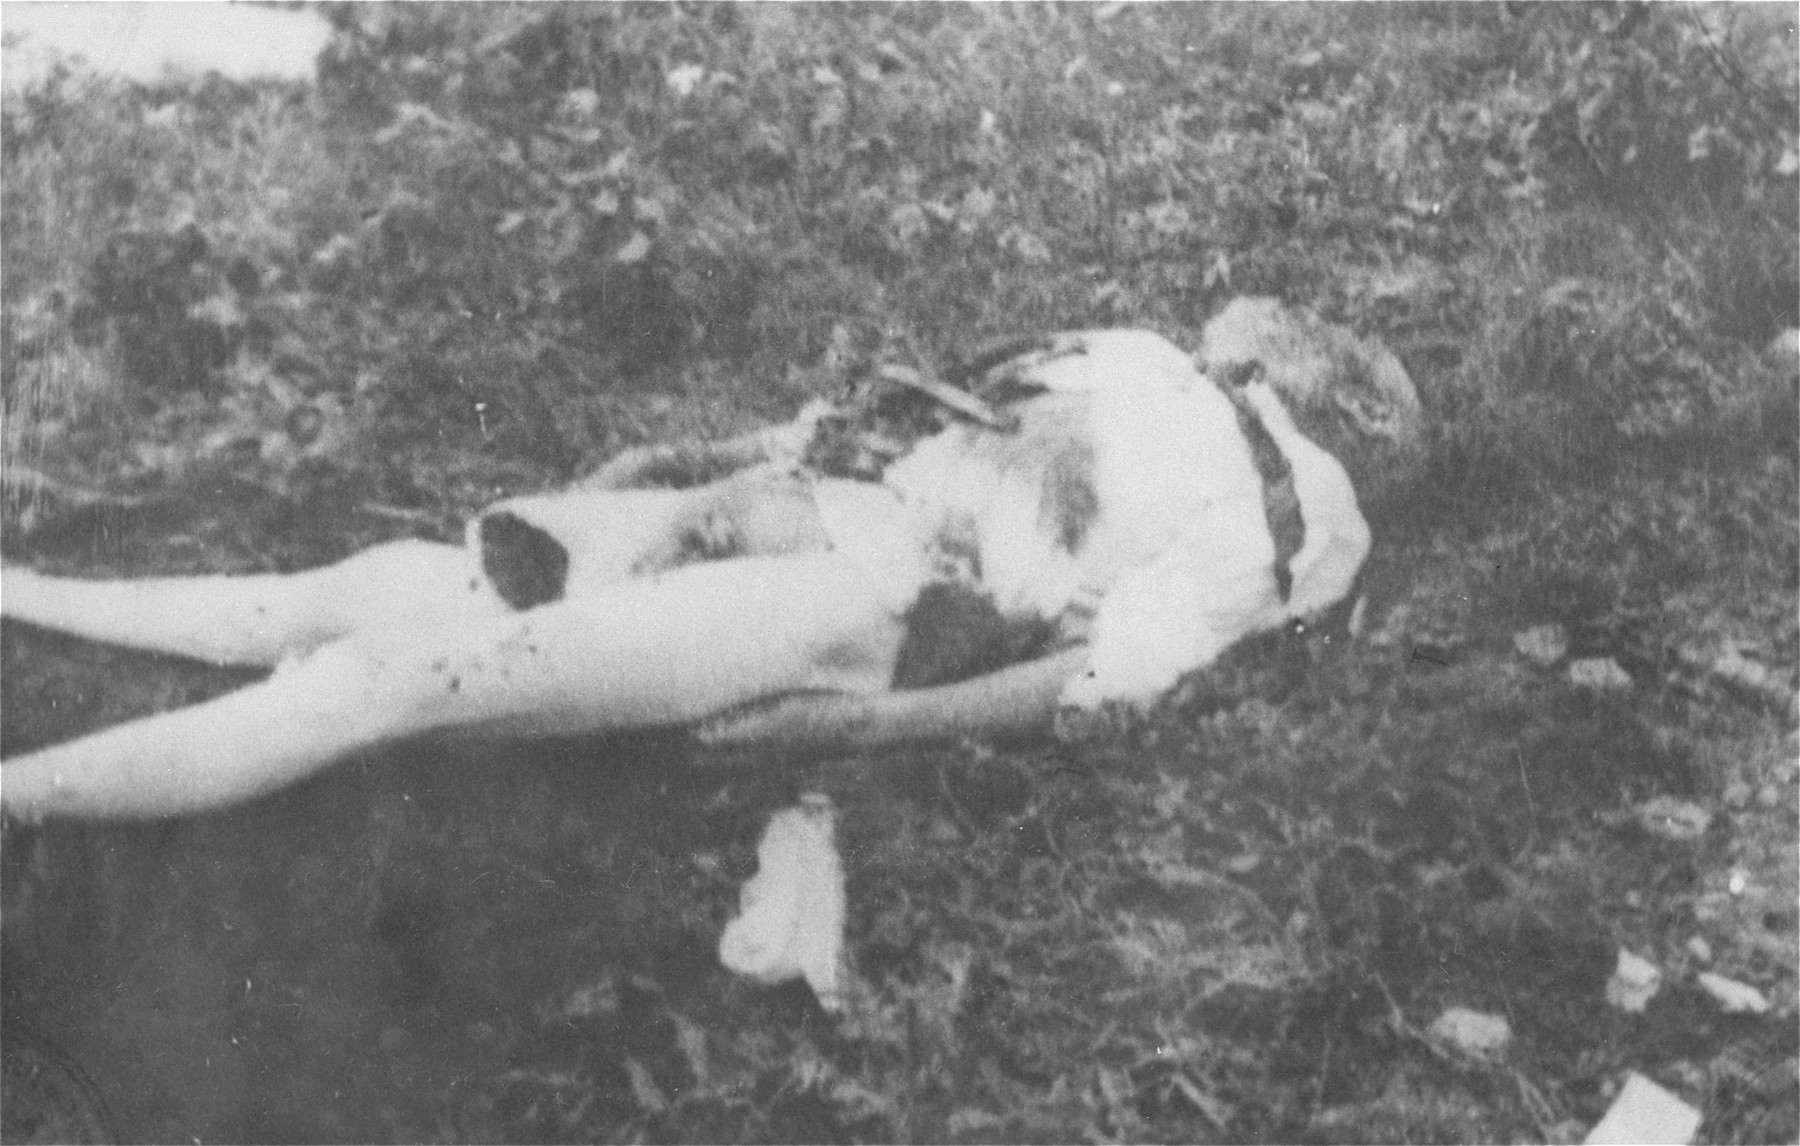 The body of a Romanian Jew who died on one of two death trains that left Iasi on June 30, 1941.  The first train was bound for Calarasi and the second for Podul Iloaiei.